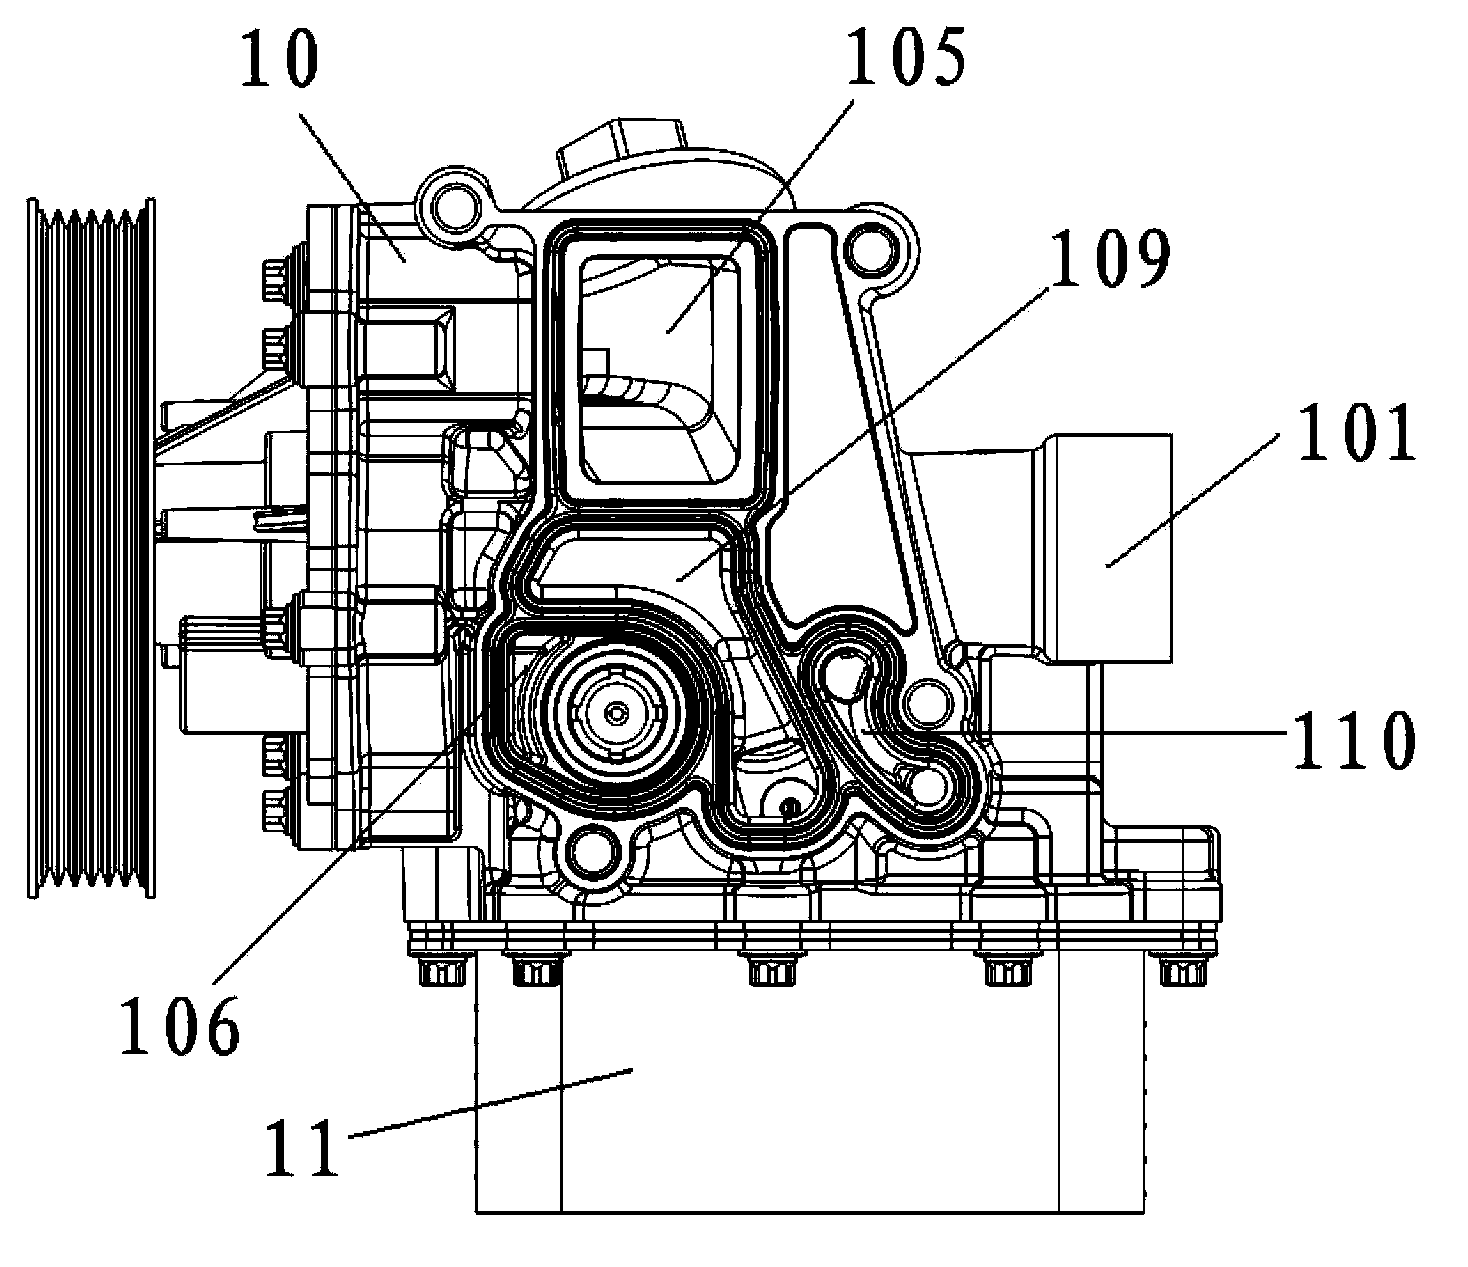 Engine cooling system, engine and vehicle